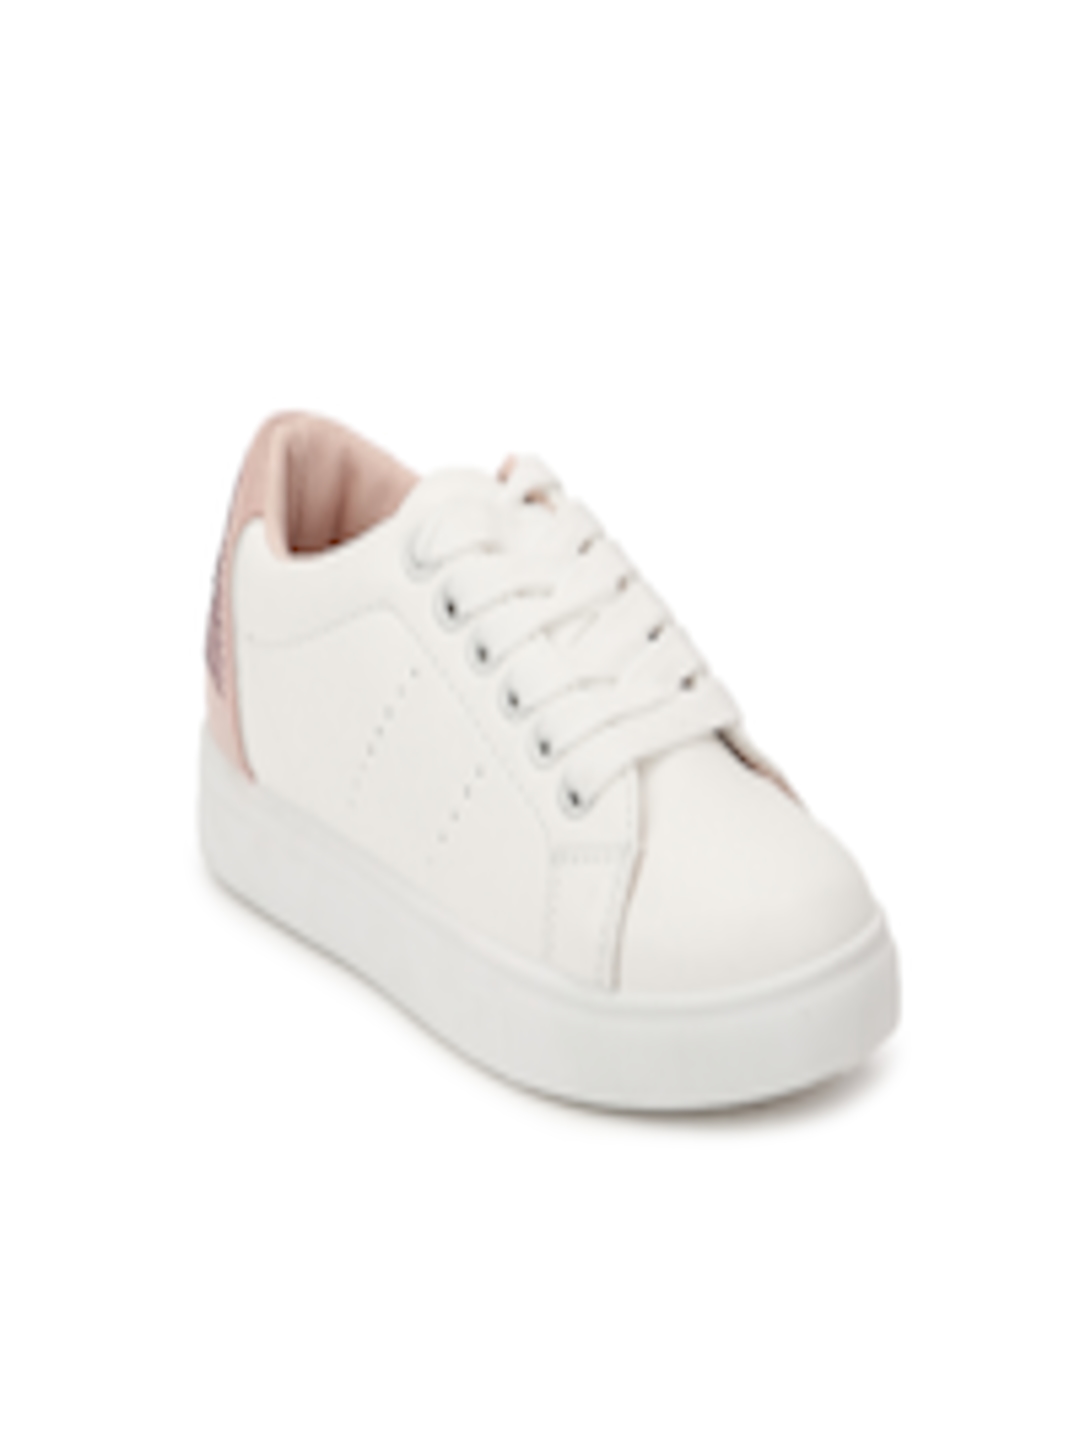 Buy MINNI TC Girls White Solid Sneakers - Casual Shoes for Girls ...